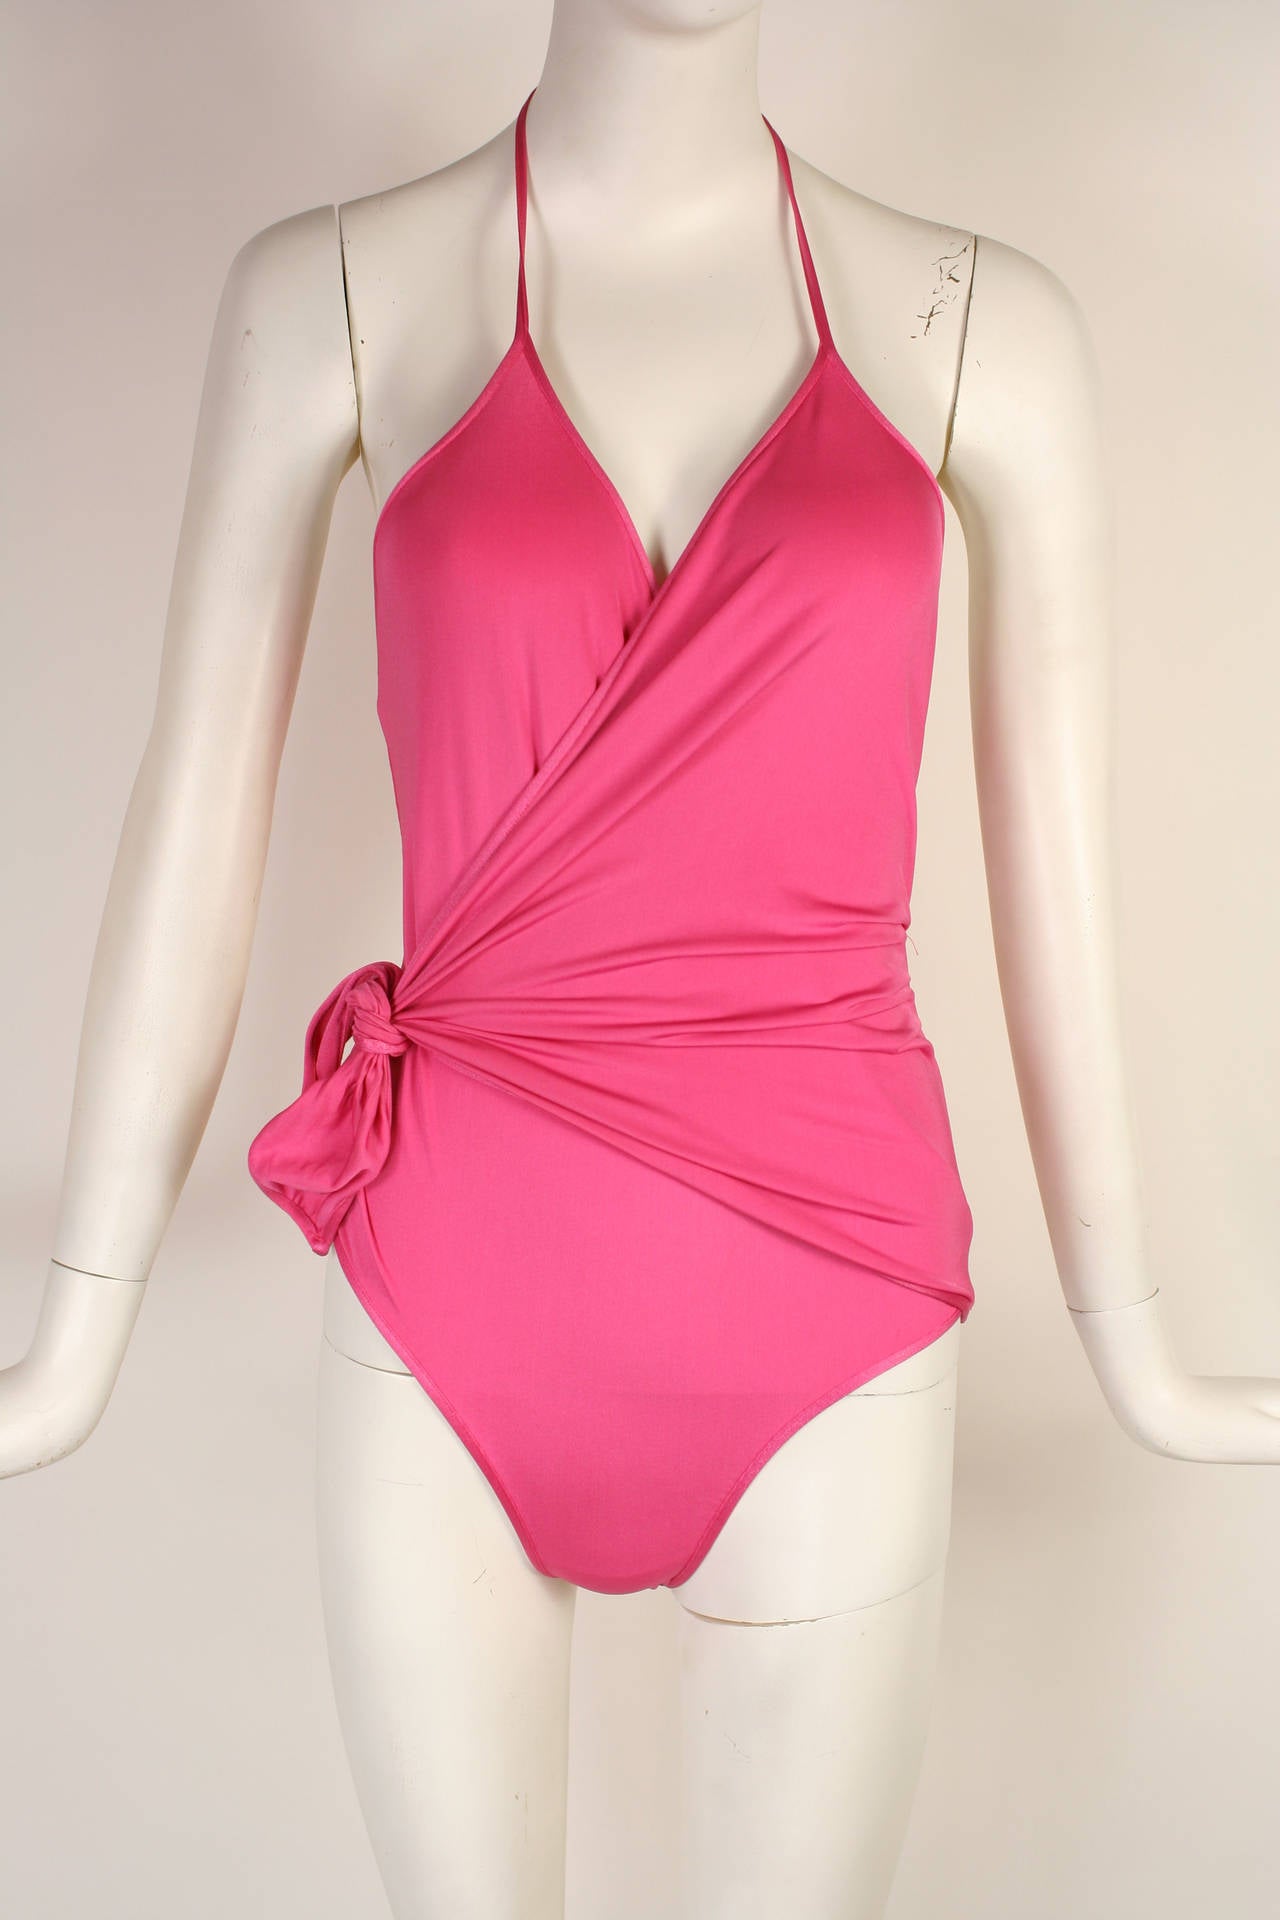 Early Gianni Versace 1970s Pink Wrap Bathing Suit.
Wraps at hips. New condition with tags. Size 42/ fits small to medium.

This item has stretch
Bust 33